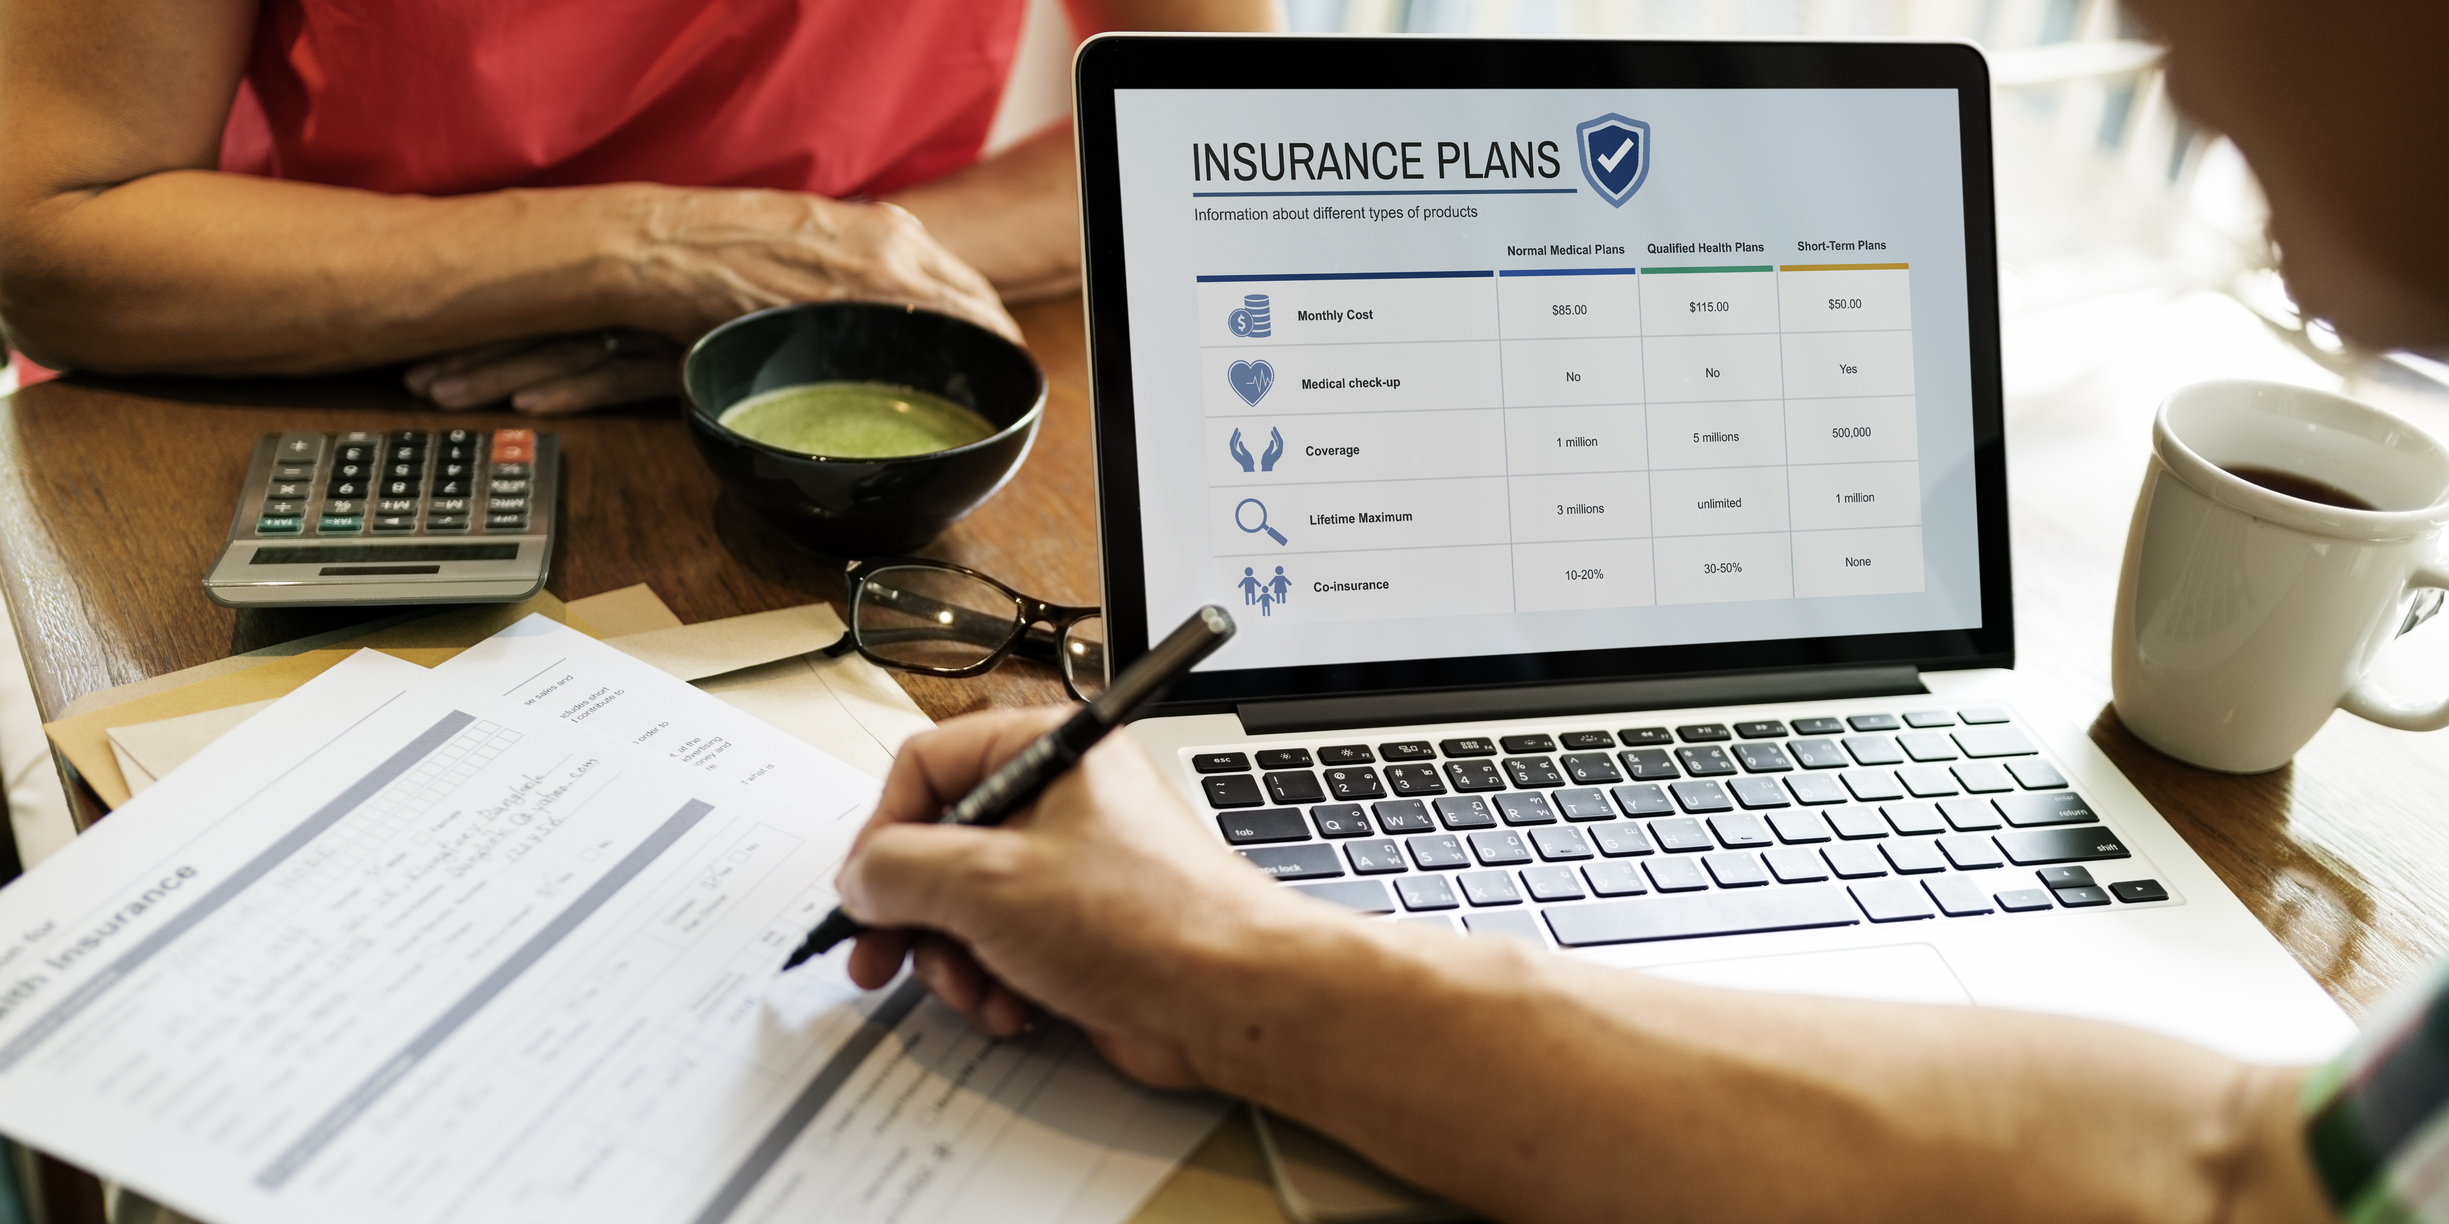 Do You Have An Insurance Plan?